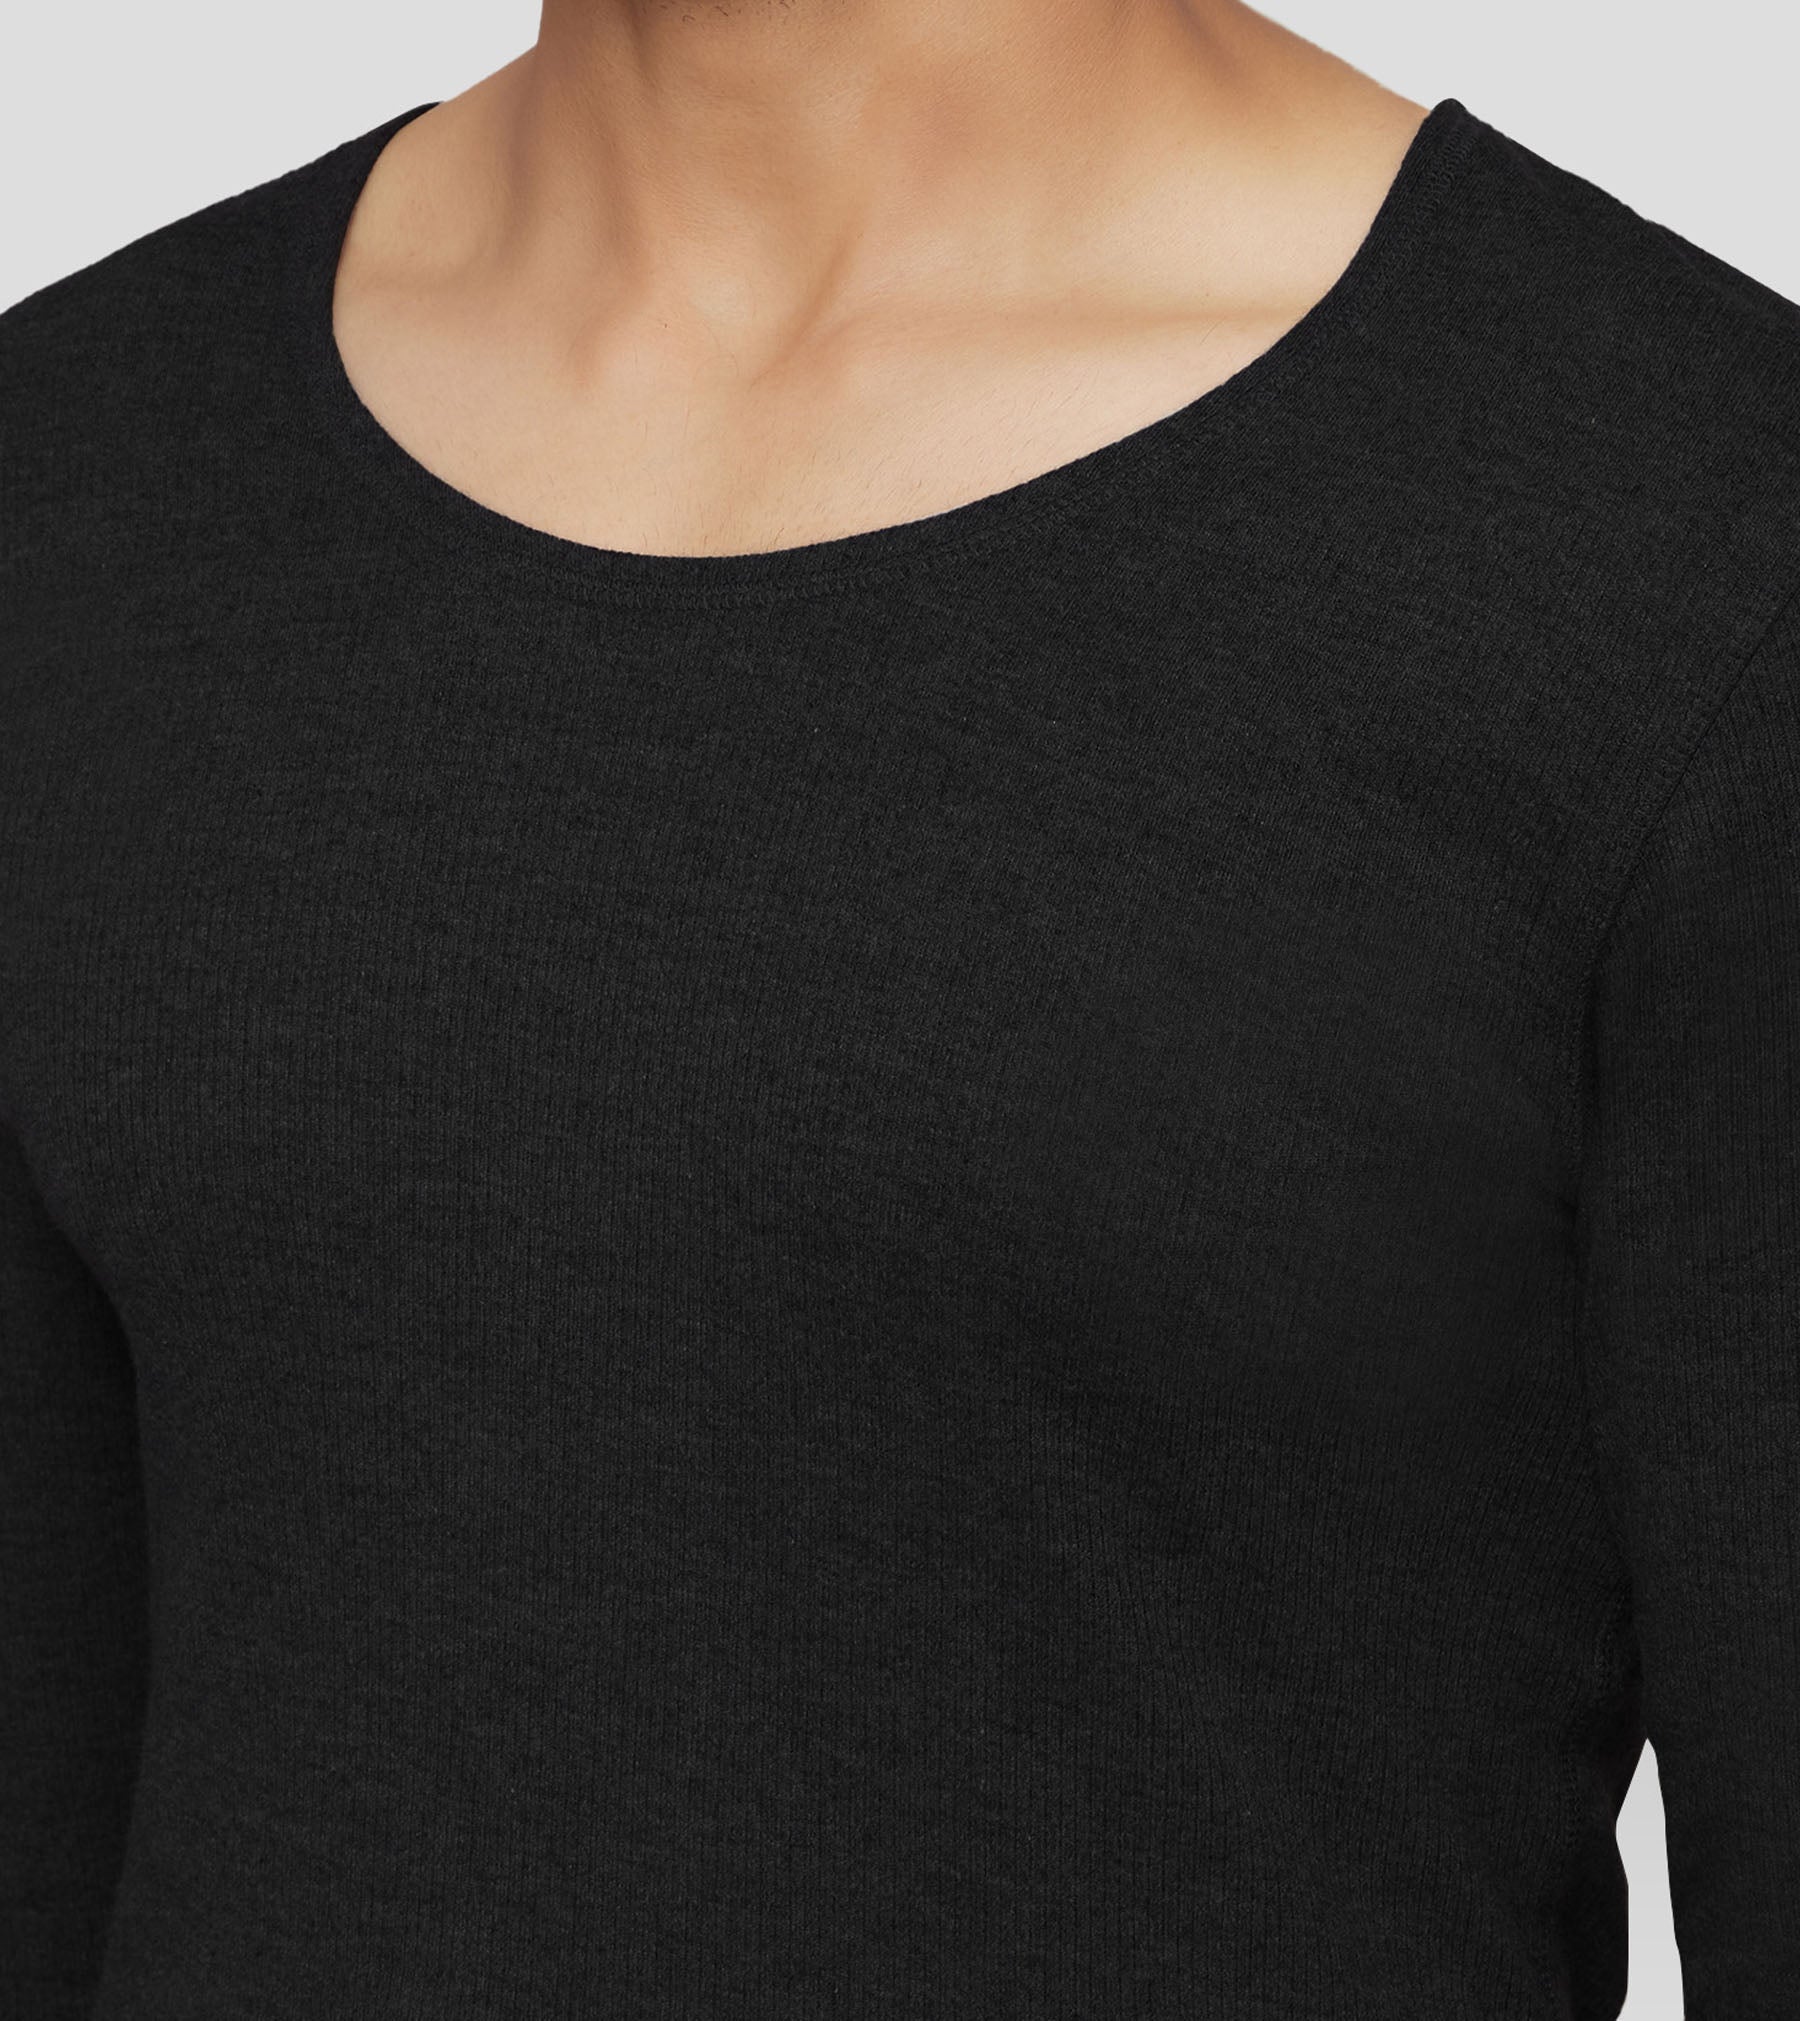 Alpine Cotton Rich Long Sleeve Thermal Set For Men Pitch Black - XYXX Mens Apparels